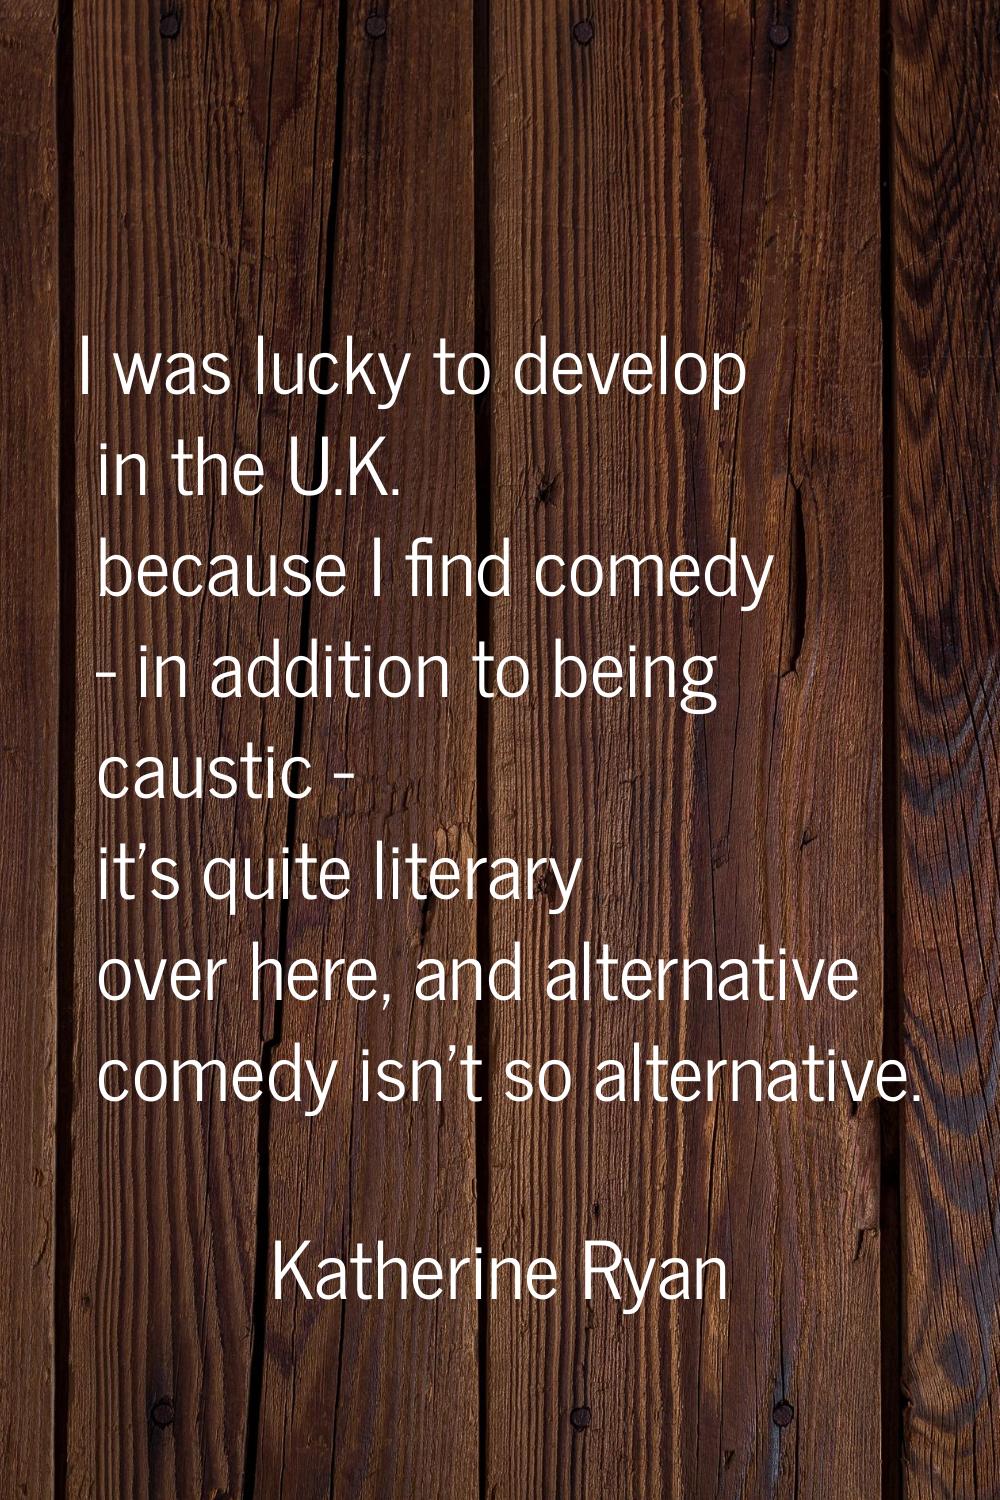 I was lucky to develop in the U.K. because I find comedy - in addition to being caustic - it's quit